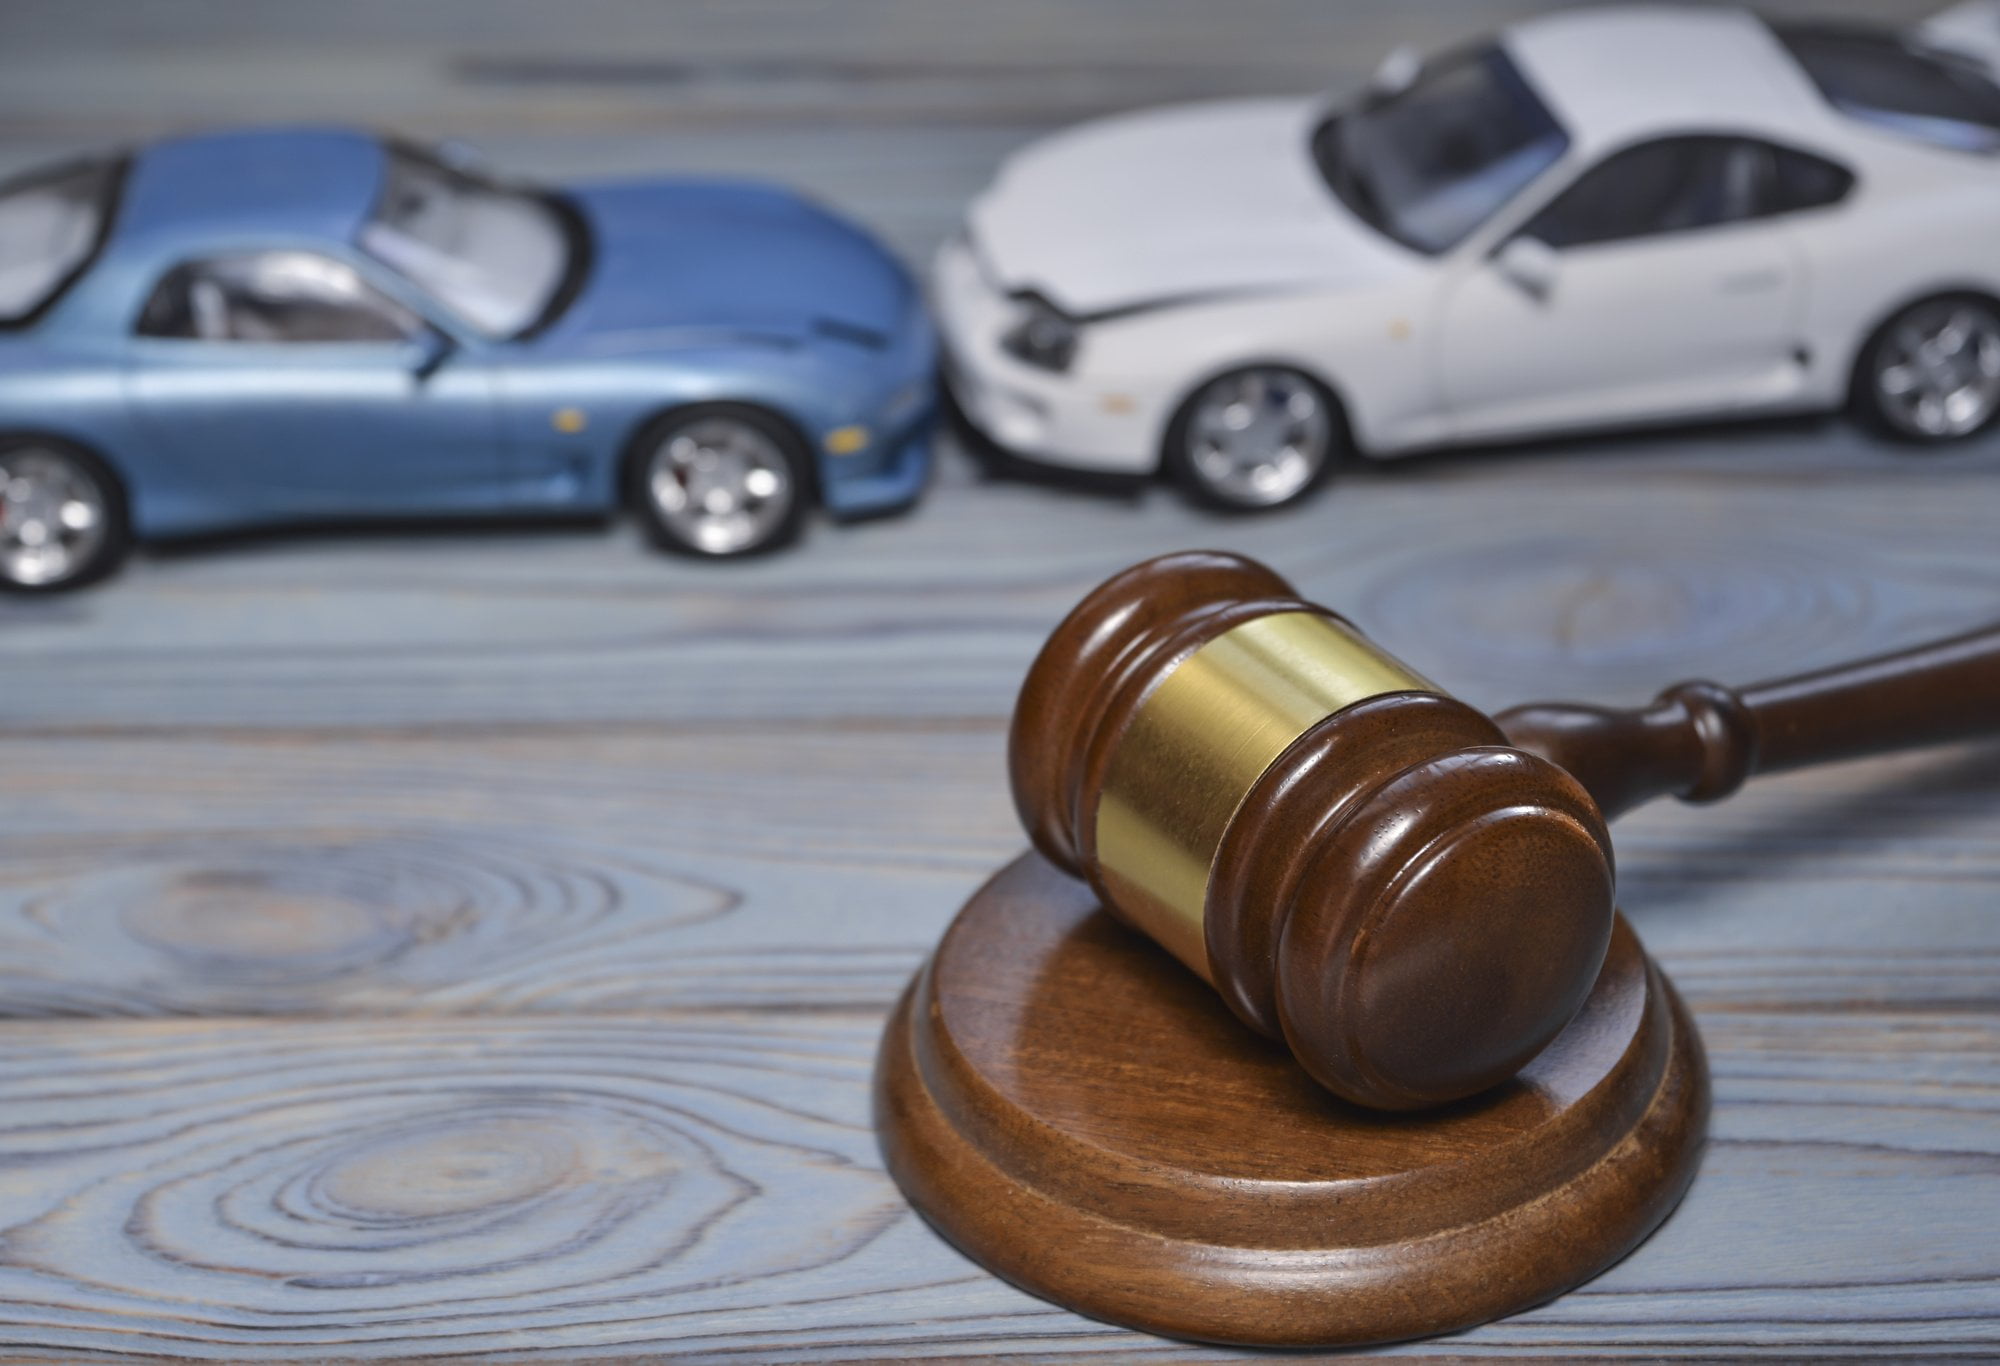 Finding the best car accident lawyers in California can be overwhelming. Follow these five tips to ensure you choose the right attorney for your case.